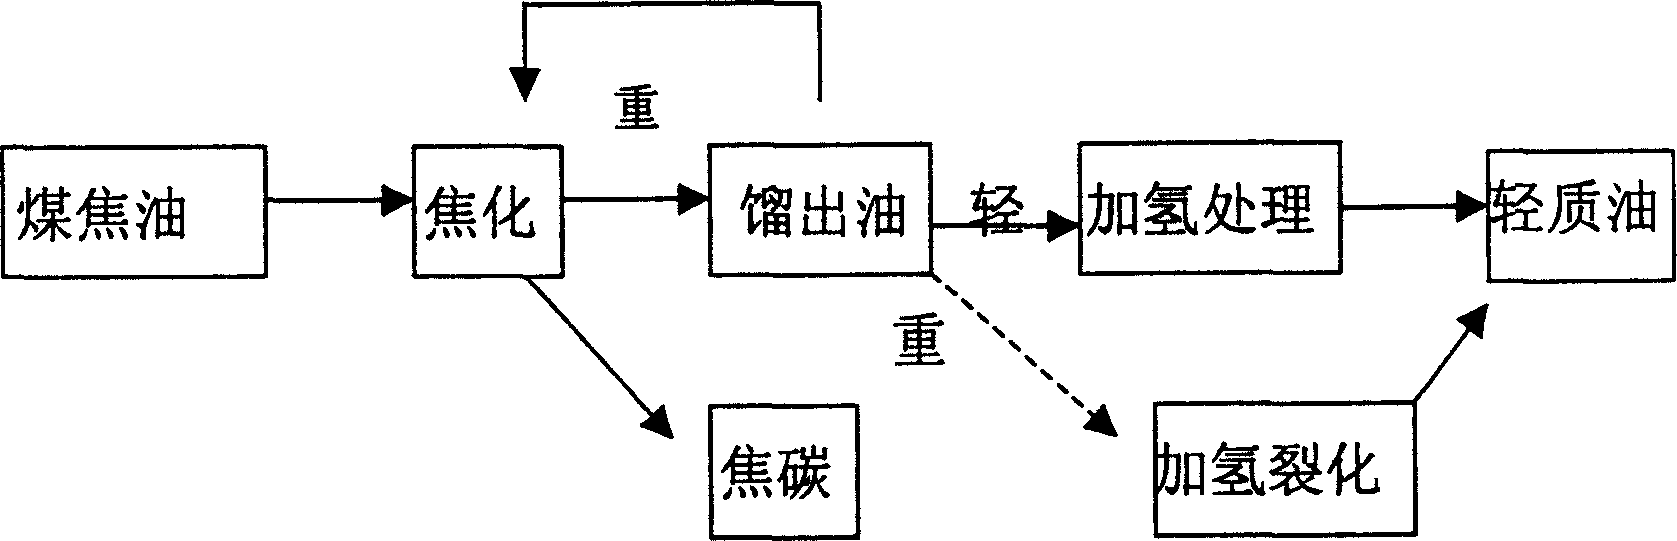 Process for producing fuel oil from coal tar